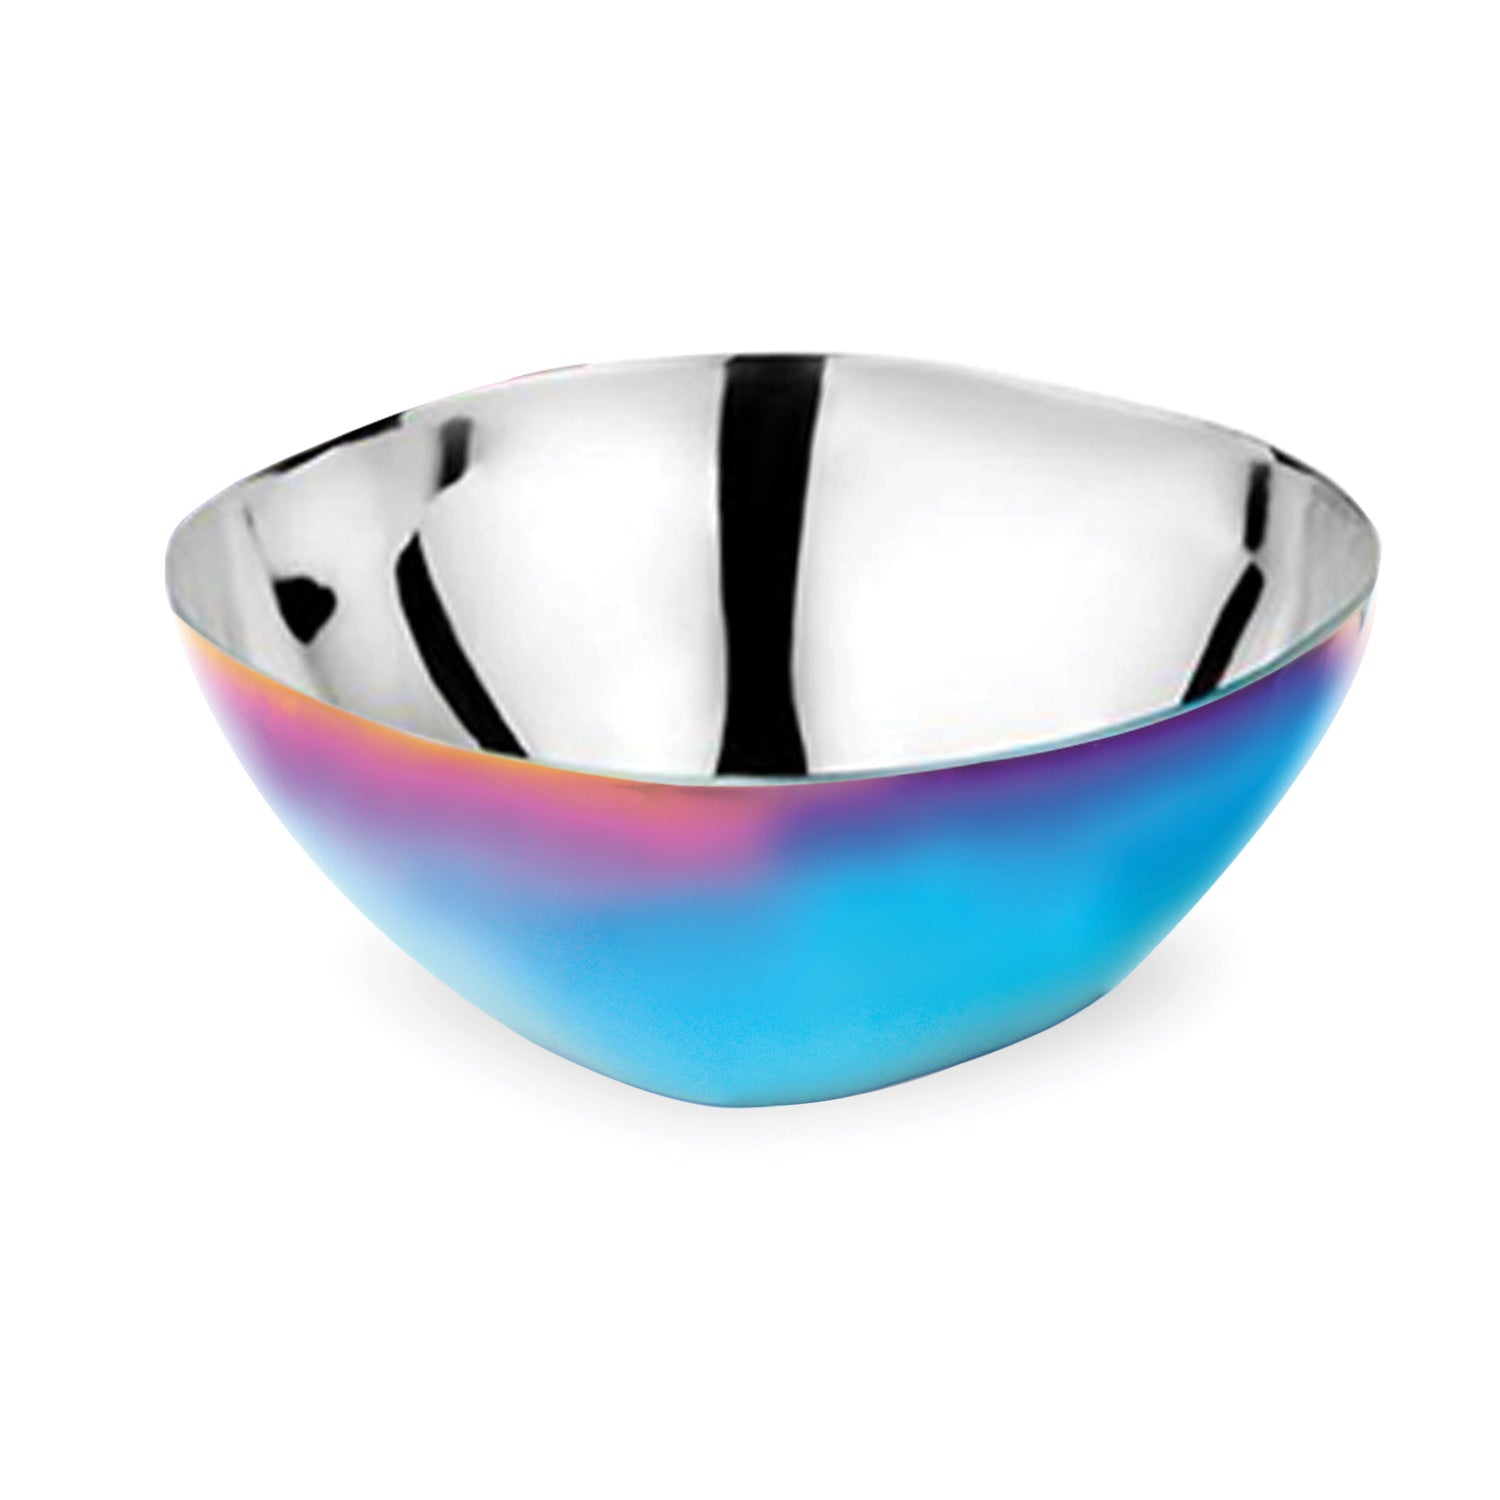 Iridescent Blue Stainless steel Smart Snacking bowl